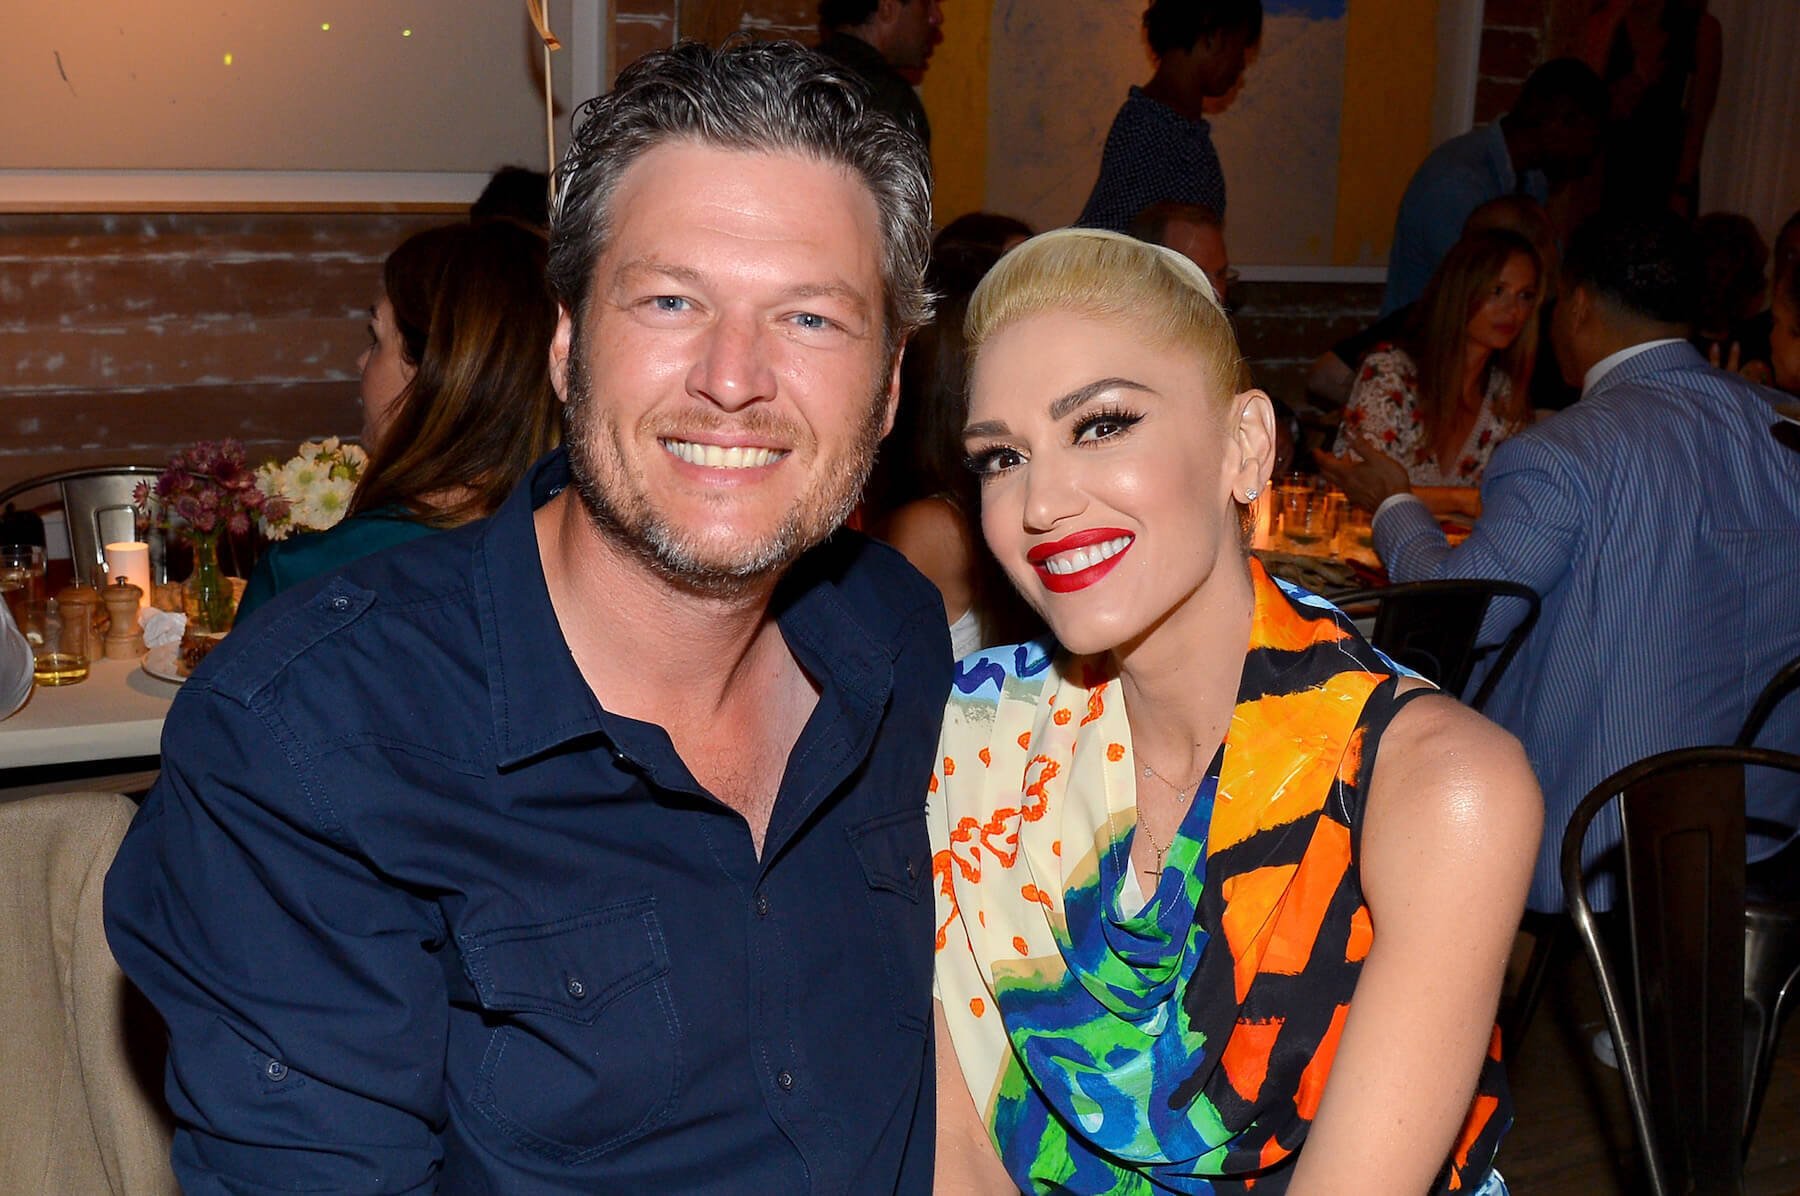 Gwen Stefani and Blake Shelton sitting next to each other and smiling for a photo